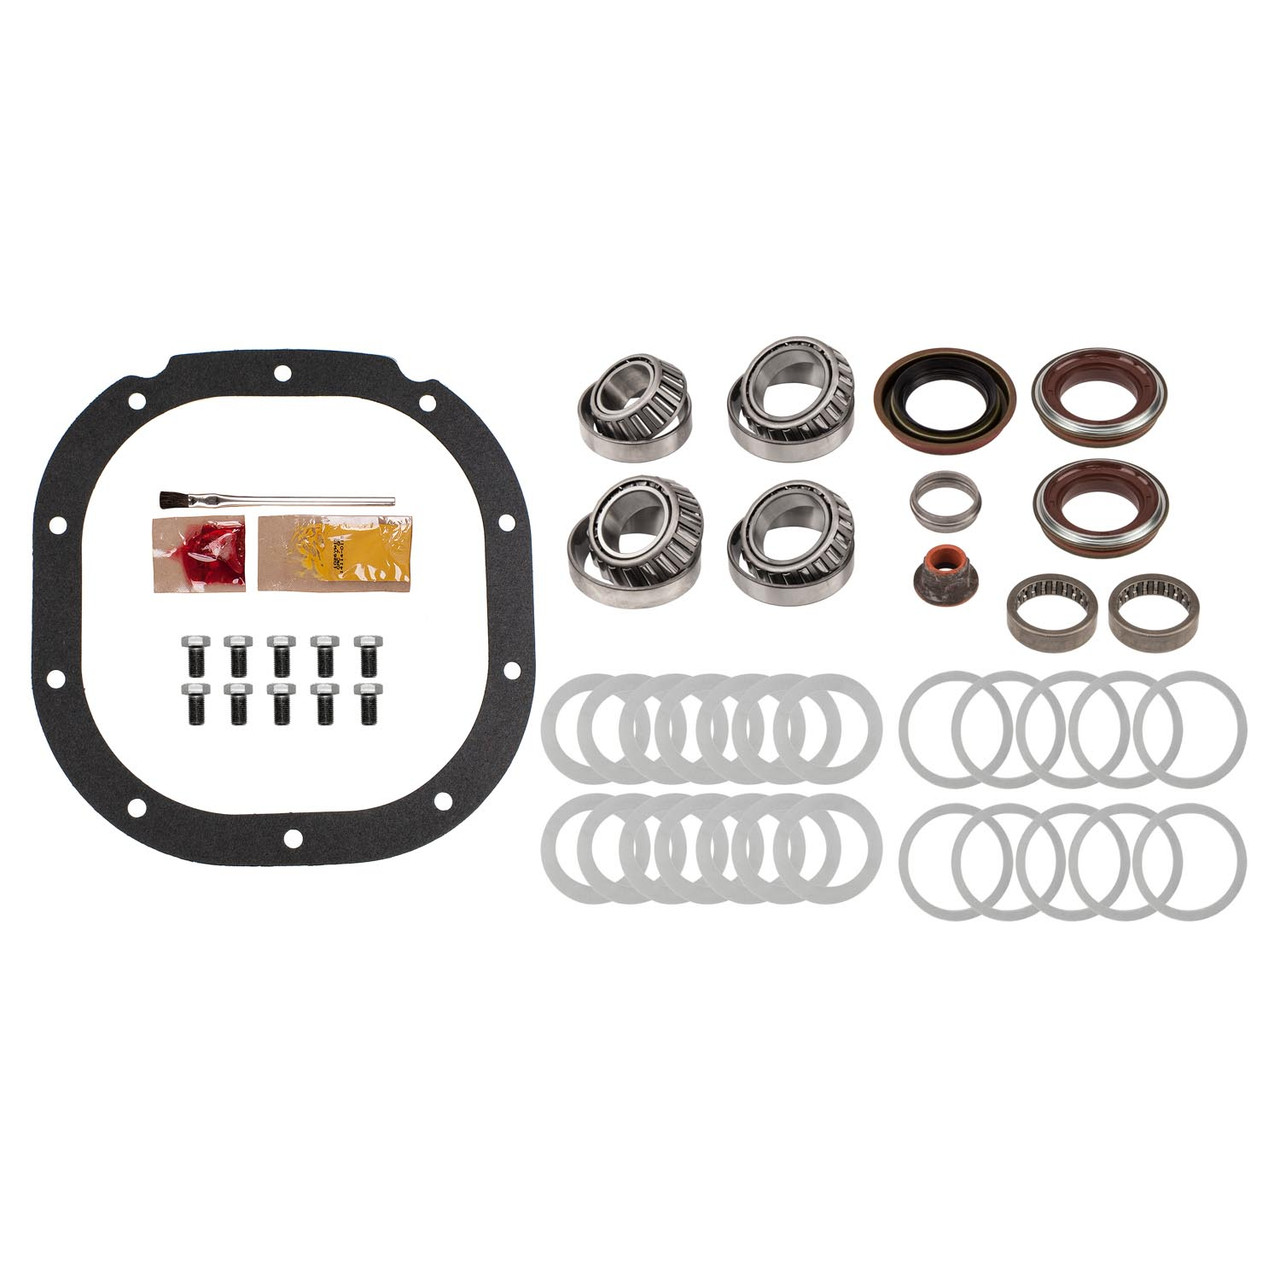 Motive Differential Master Bearing Kit - Timken (Ford 8.8 inch 10 bolt)